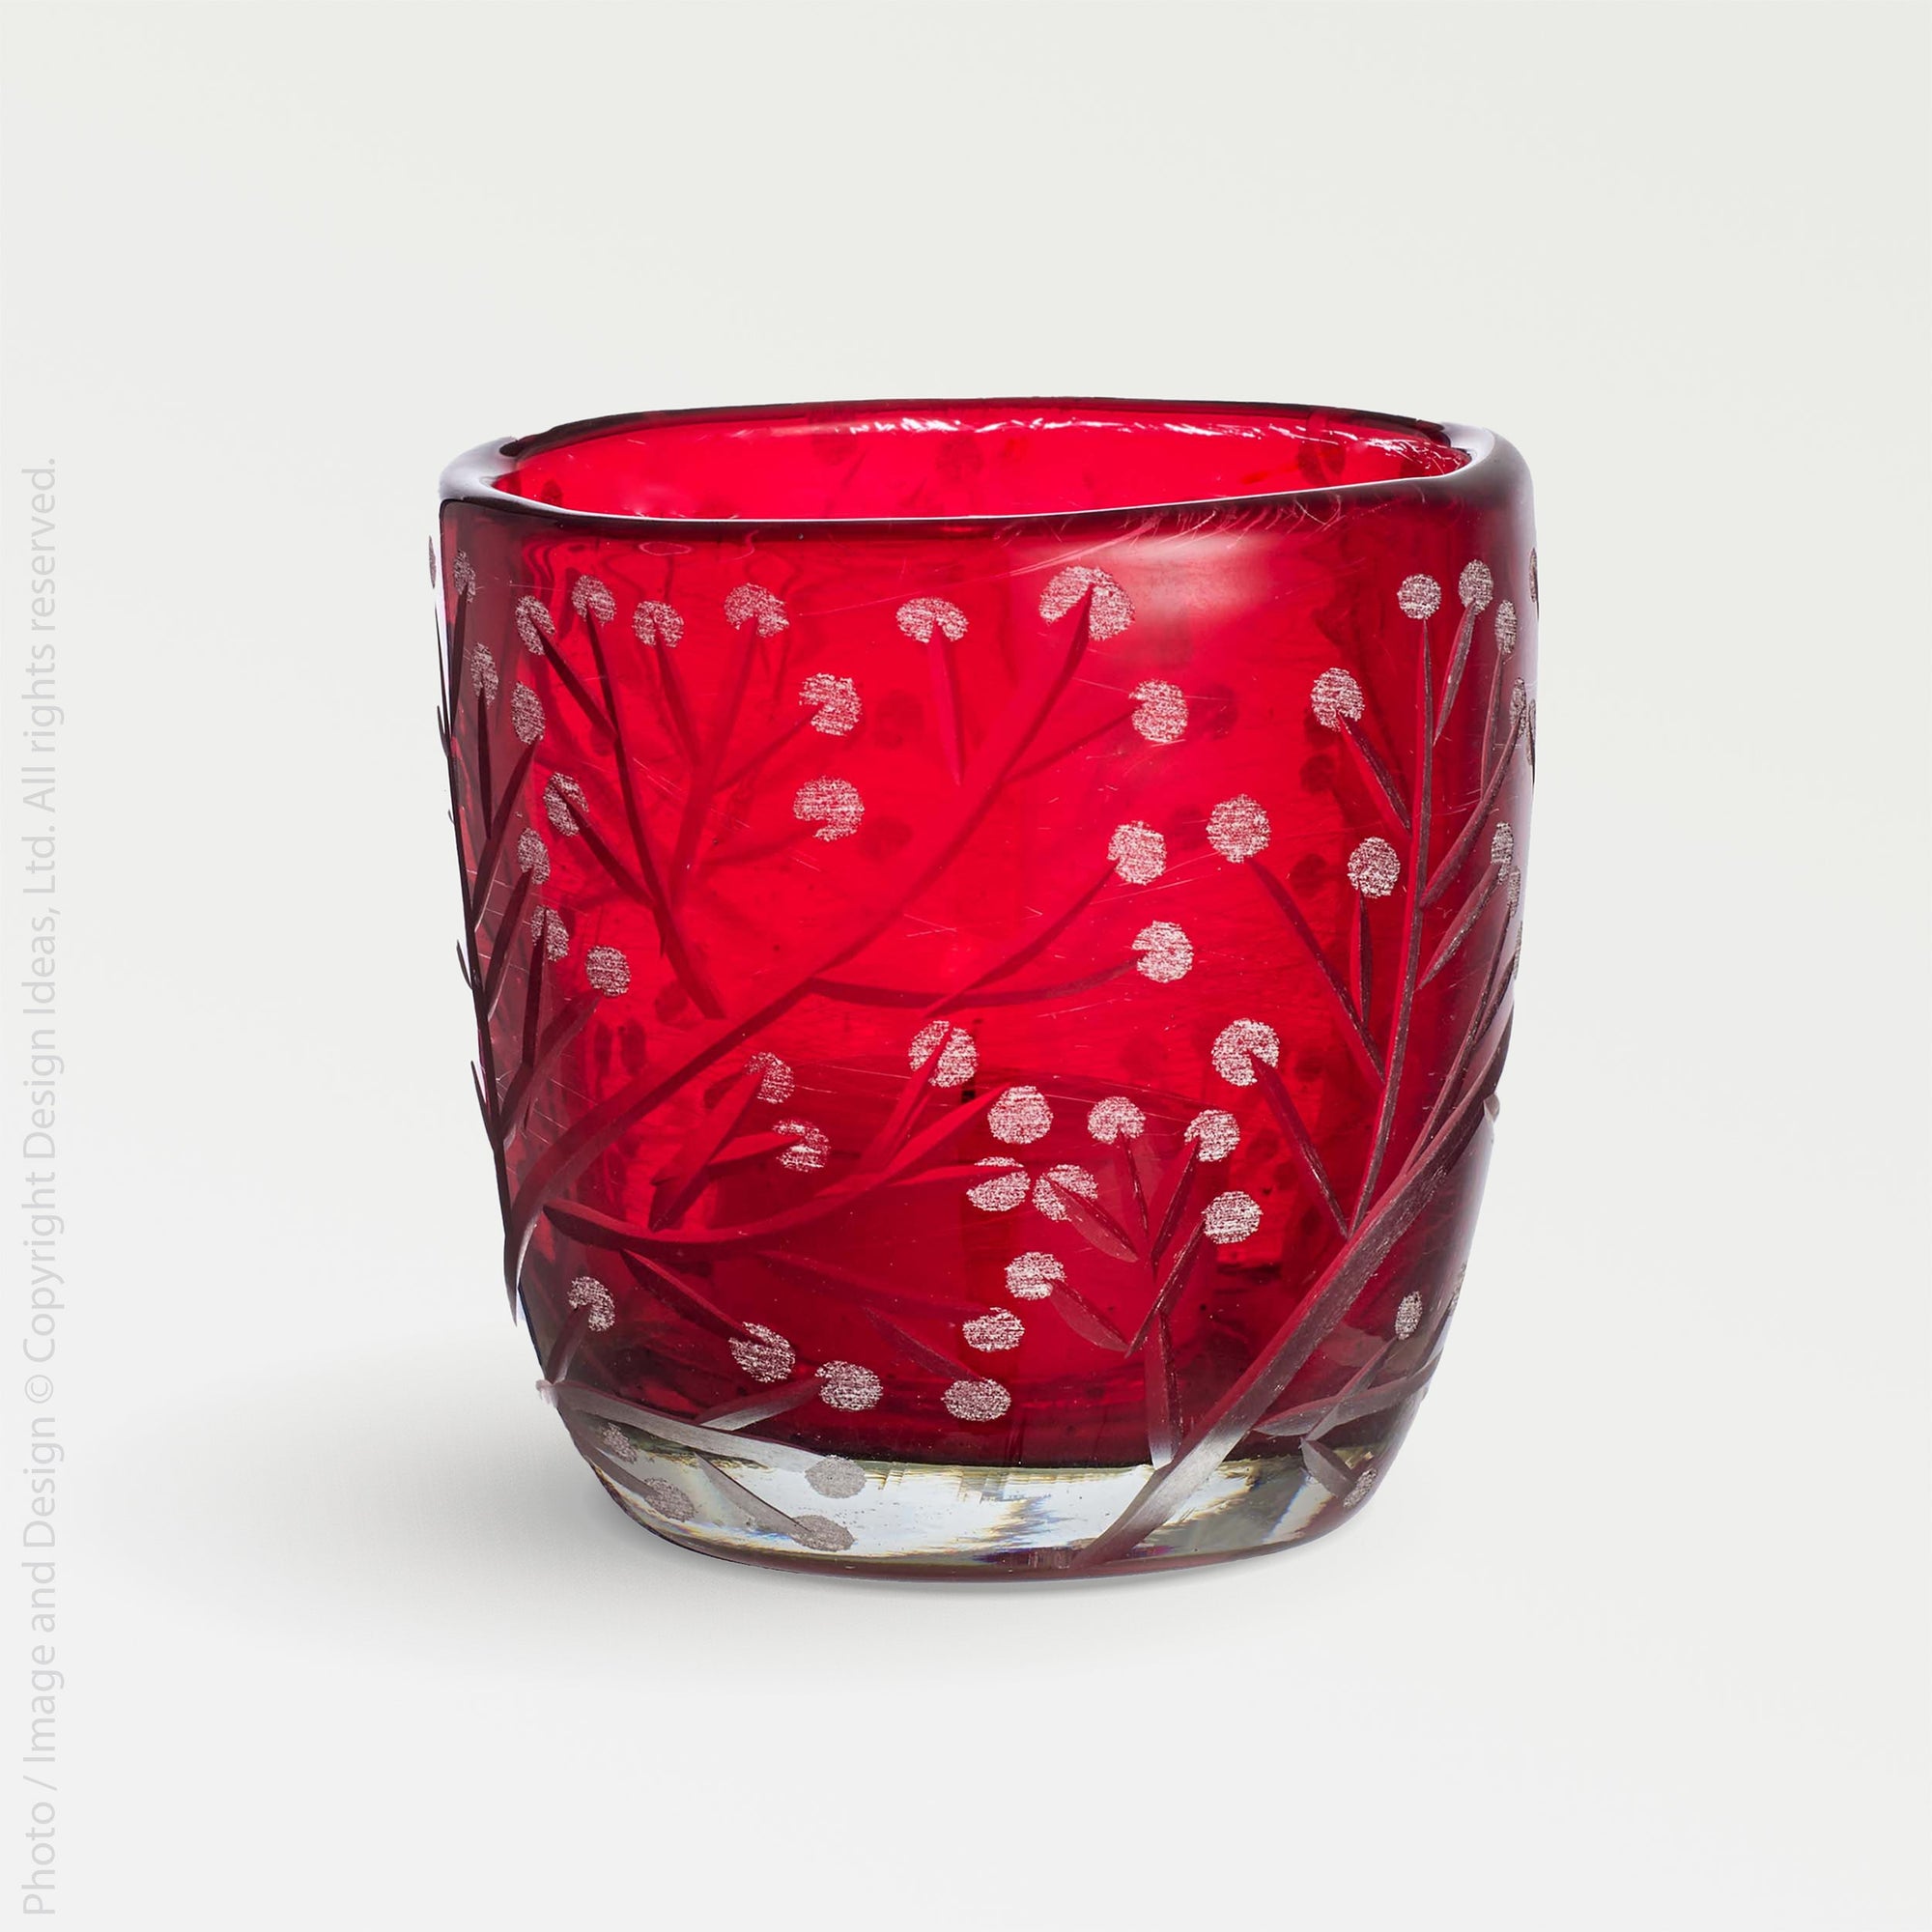 Vatisse™ candleholder - Red | Image 1 | Premium Candleholder from the Vatisse collection | made with Glass for long lasting use | texxture